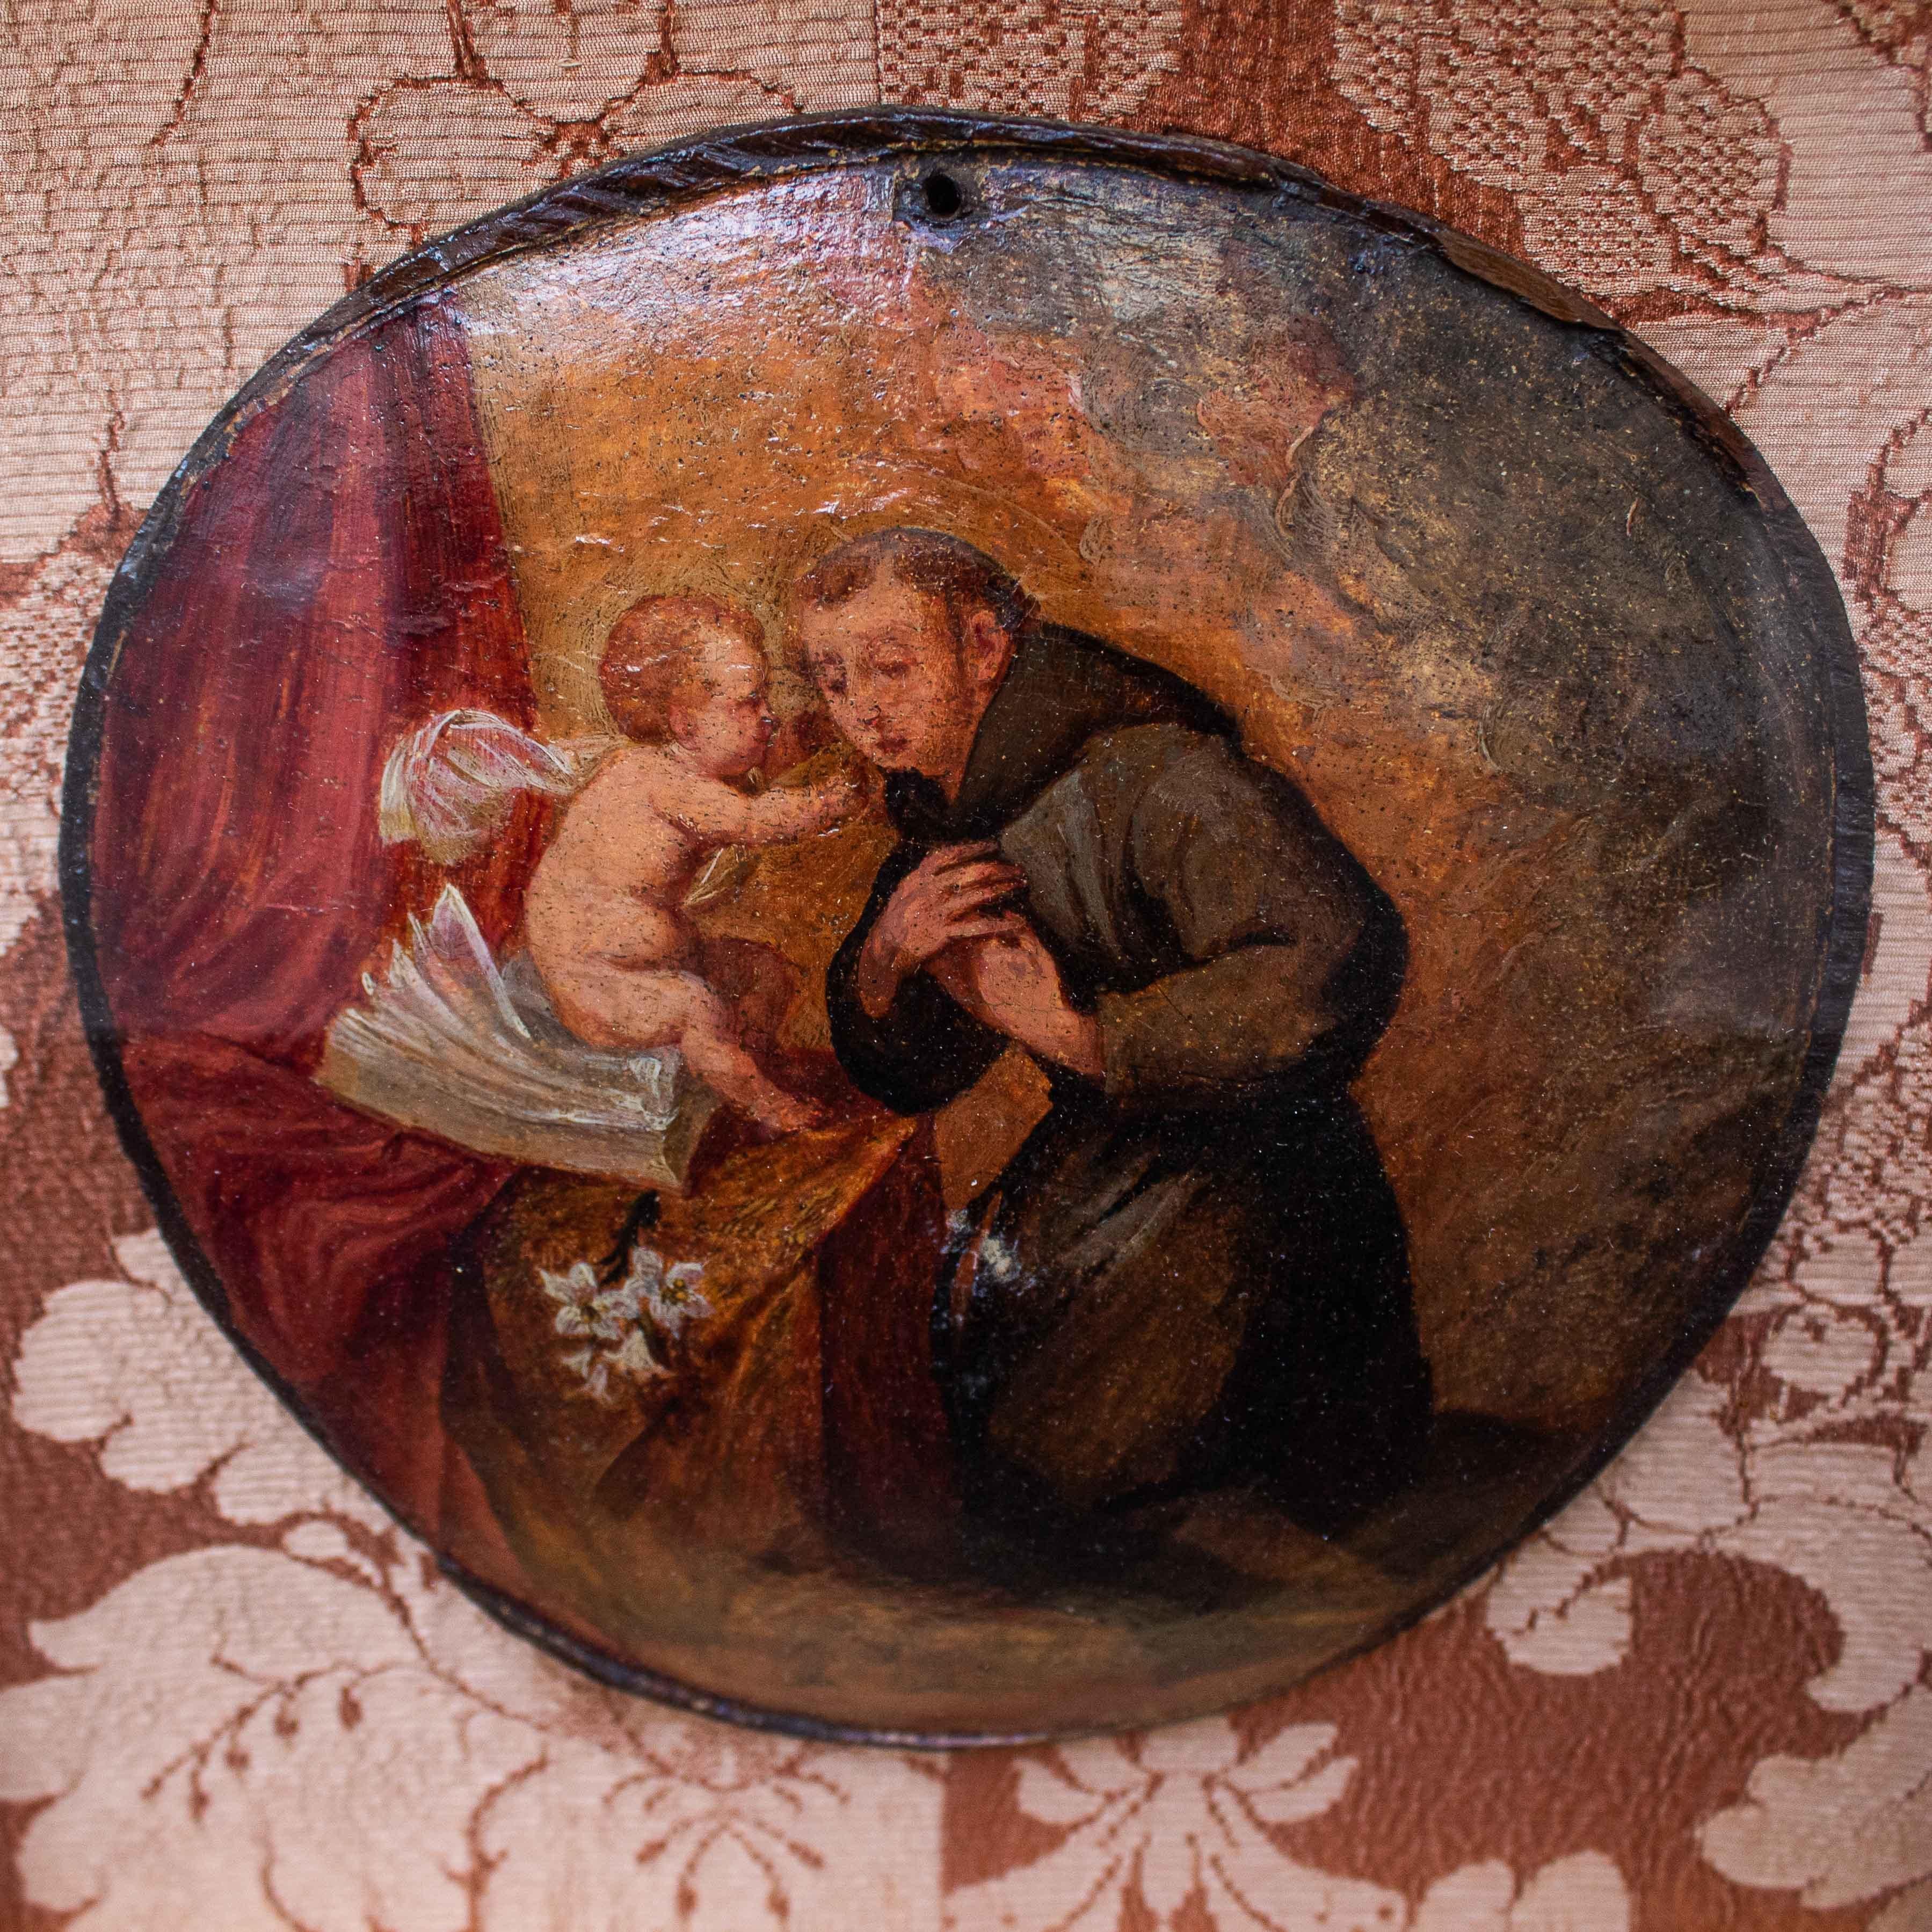 17th Century
Saint Anthony of Padua with the Child Jesus
Oil on round panel, 20 x 22 cm - with frame 36 x 39 cm

The small painting in question, characterized by a curious support such as the round and convex table, depicts St. Anthony of Padua